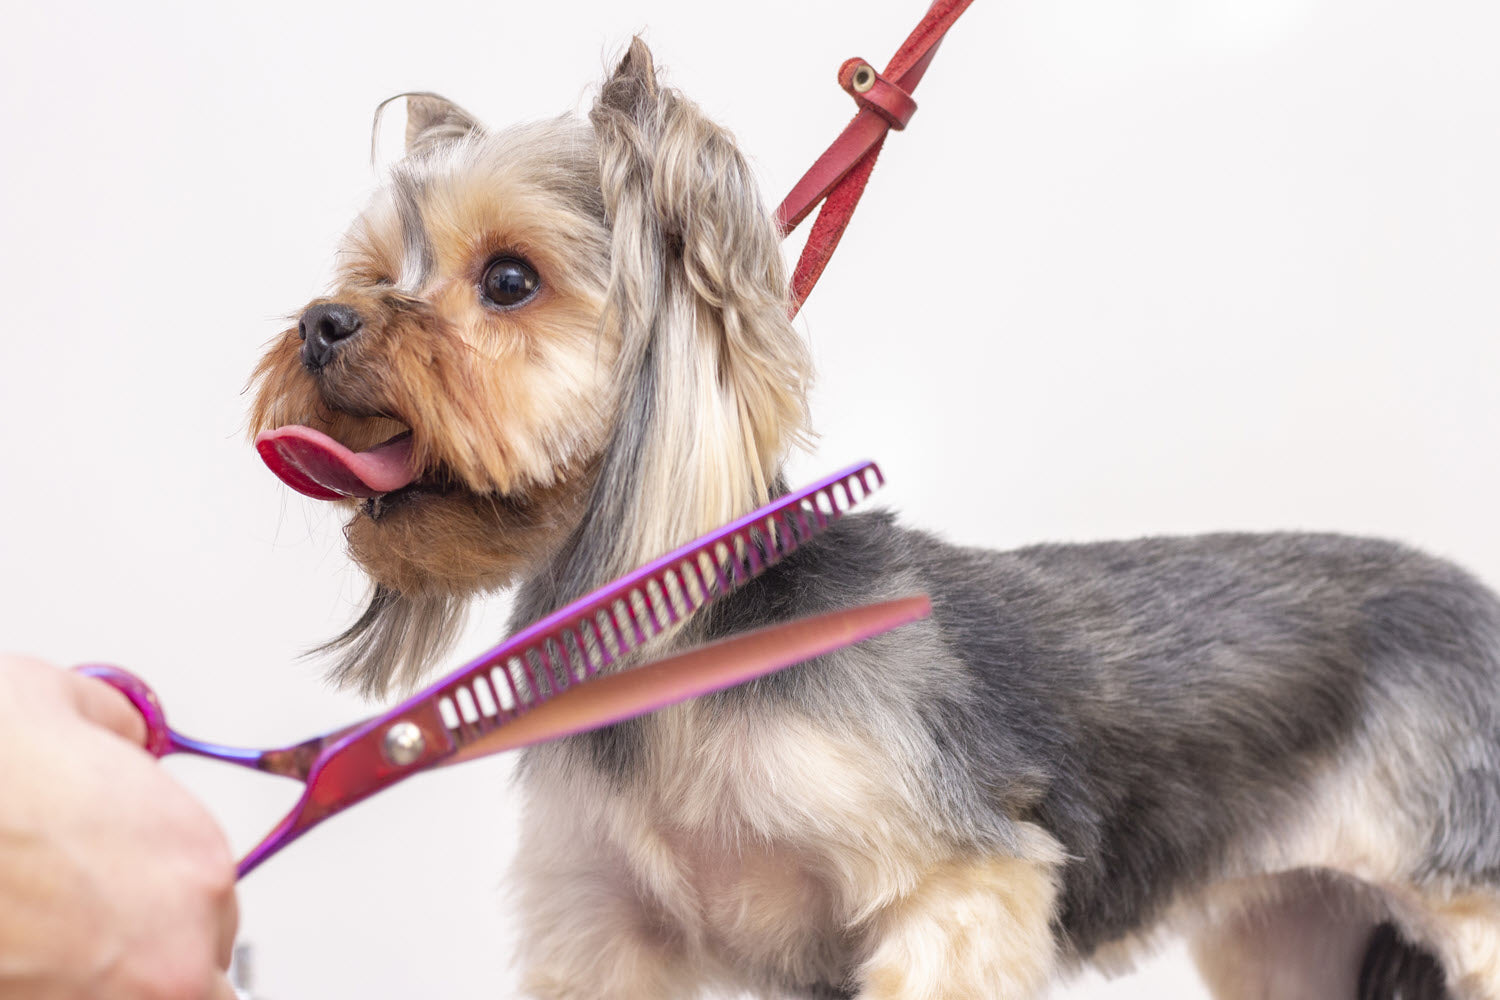 How to Choose the Right Brush or Comb for Your Dog